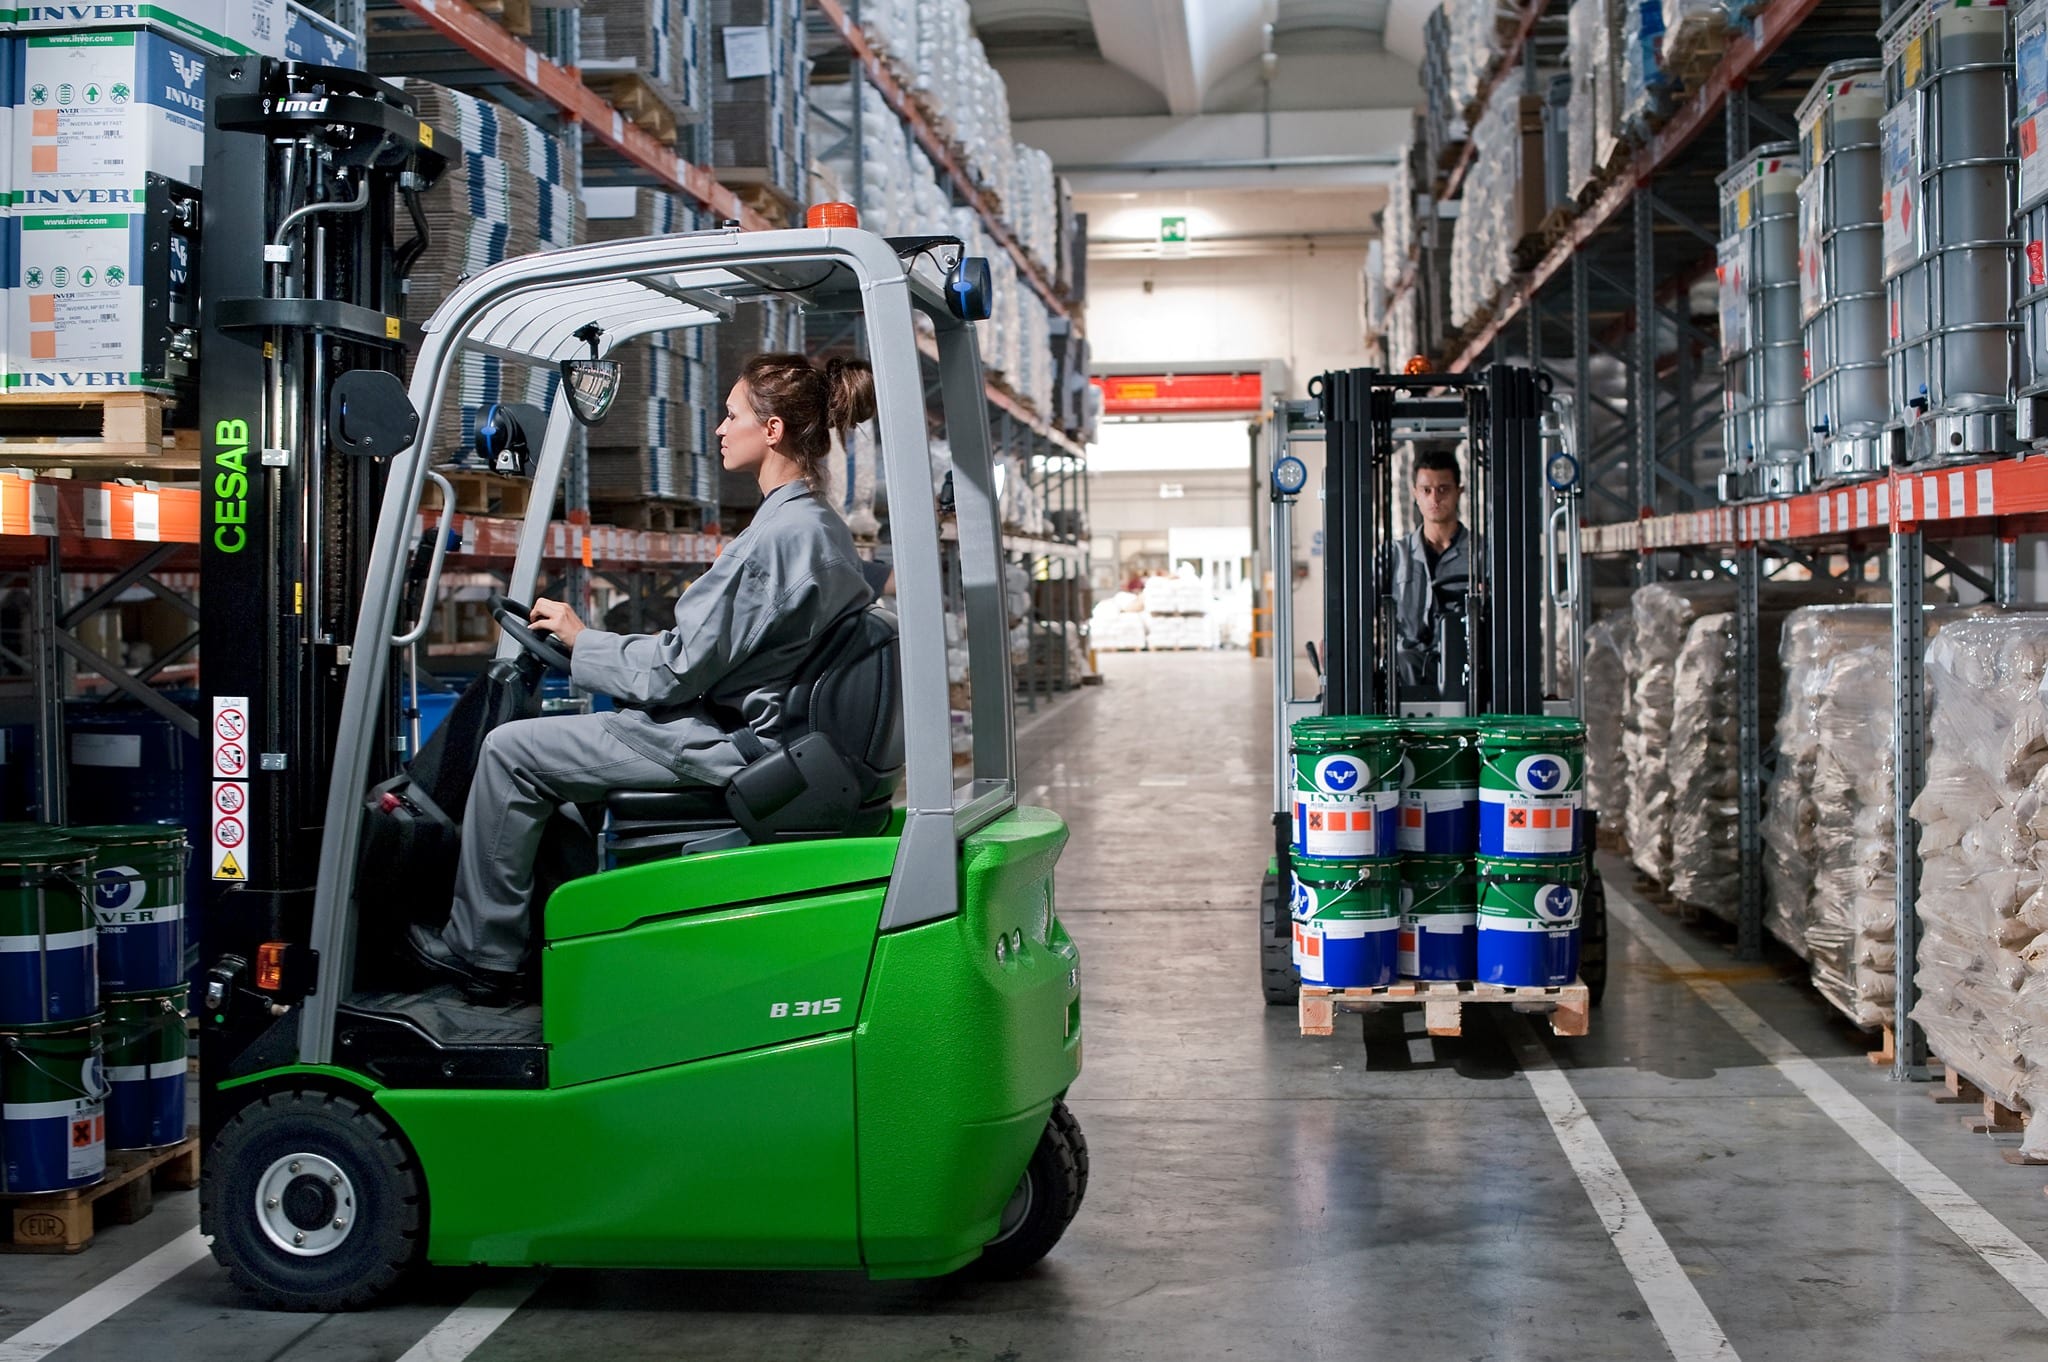 Li-ion forklift trucks for sale and hire in Northampton, Nottingham, Derby, Warwick, Leicester, Birmingham and across East Midlands, and West Midlands. 